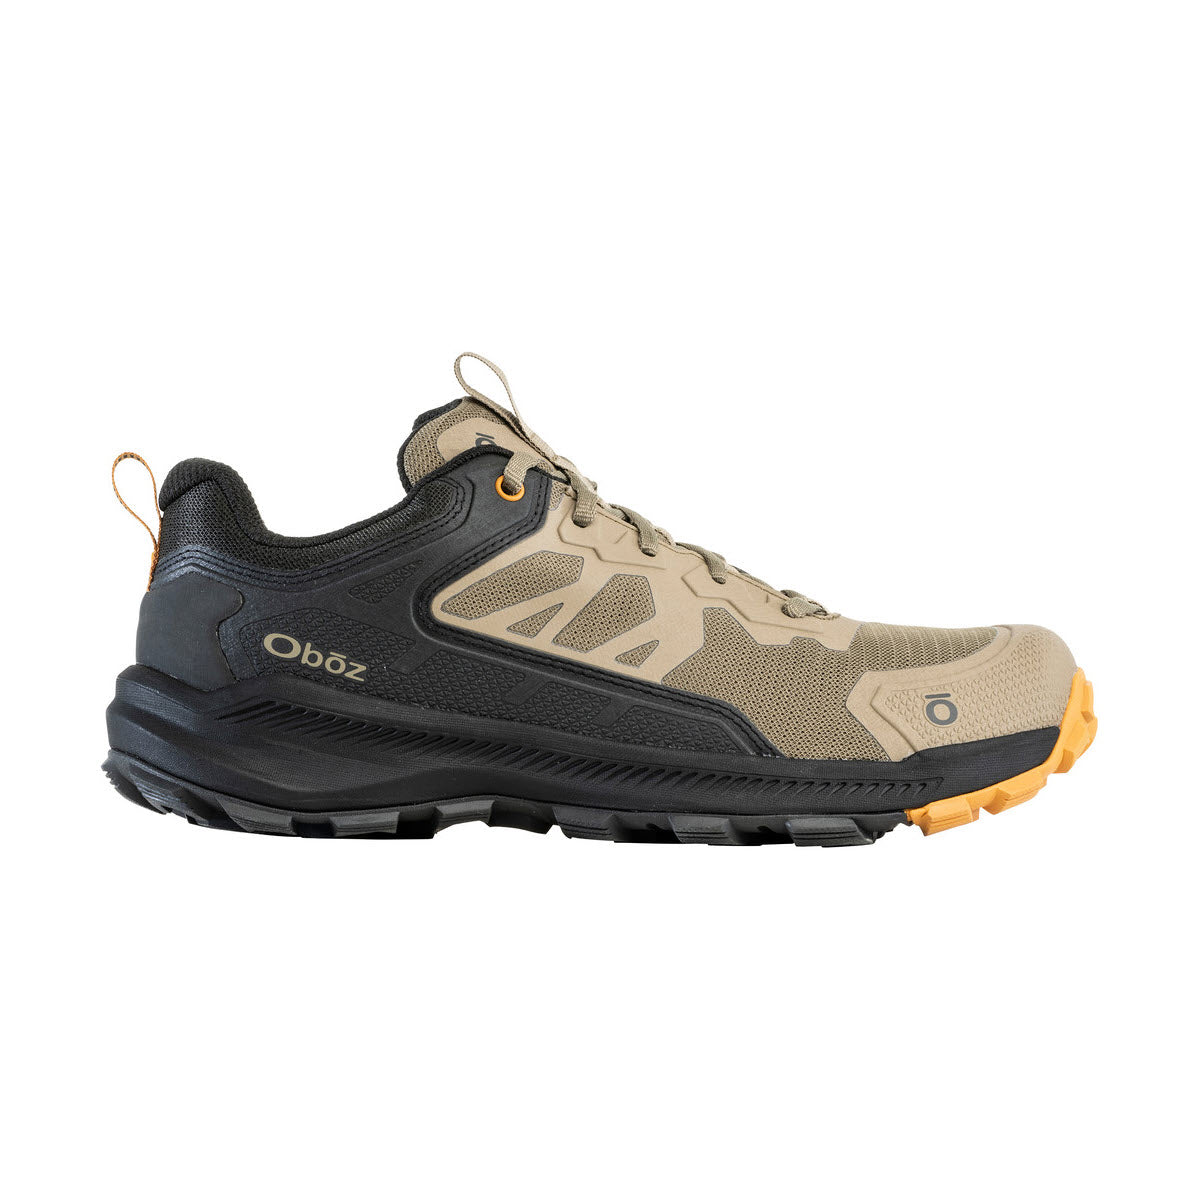 Side view of a men&#39;s Oboz Katabatic Low Thicket hiking shoe in gray and black with a yellow accent on the sole, isolated on a white background.